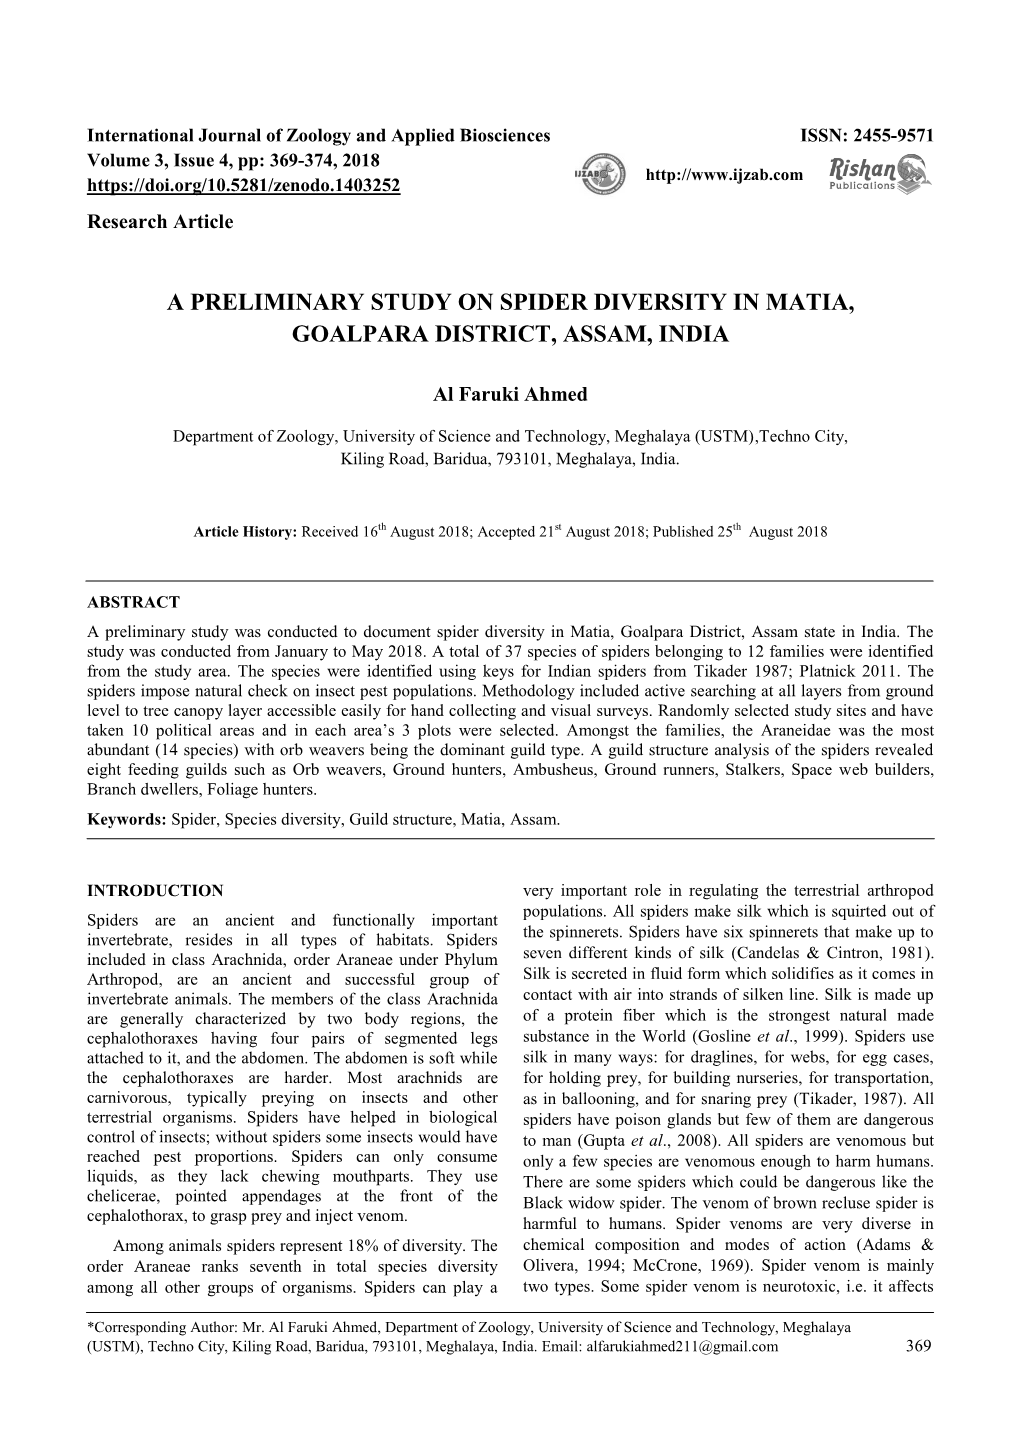 A Preliminary Study on Spider Diversity in Matia, Goalpara District, Assam, India